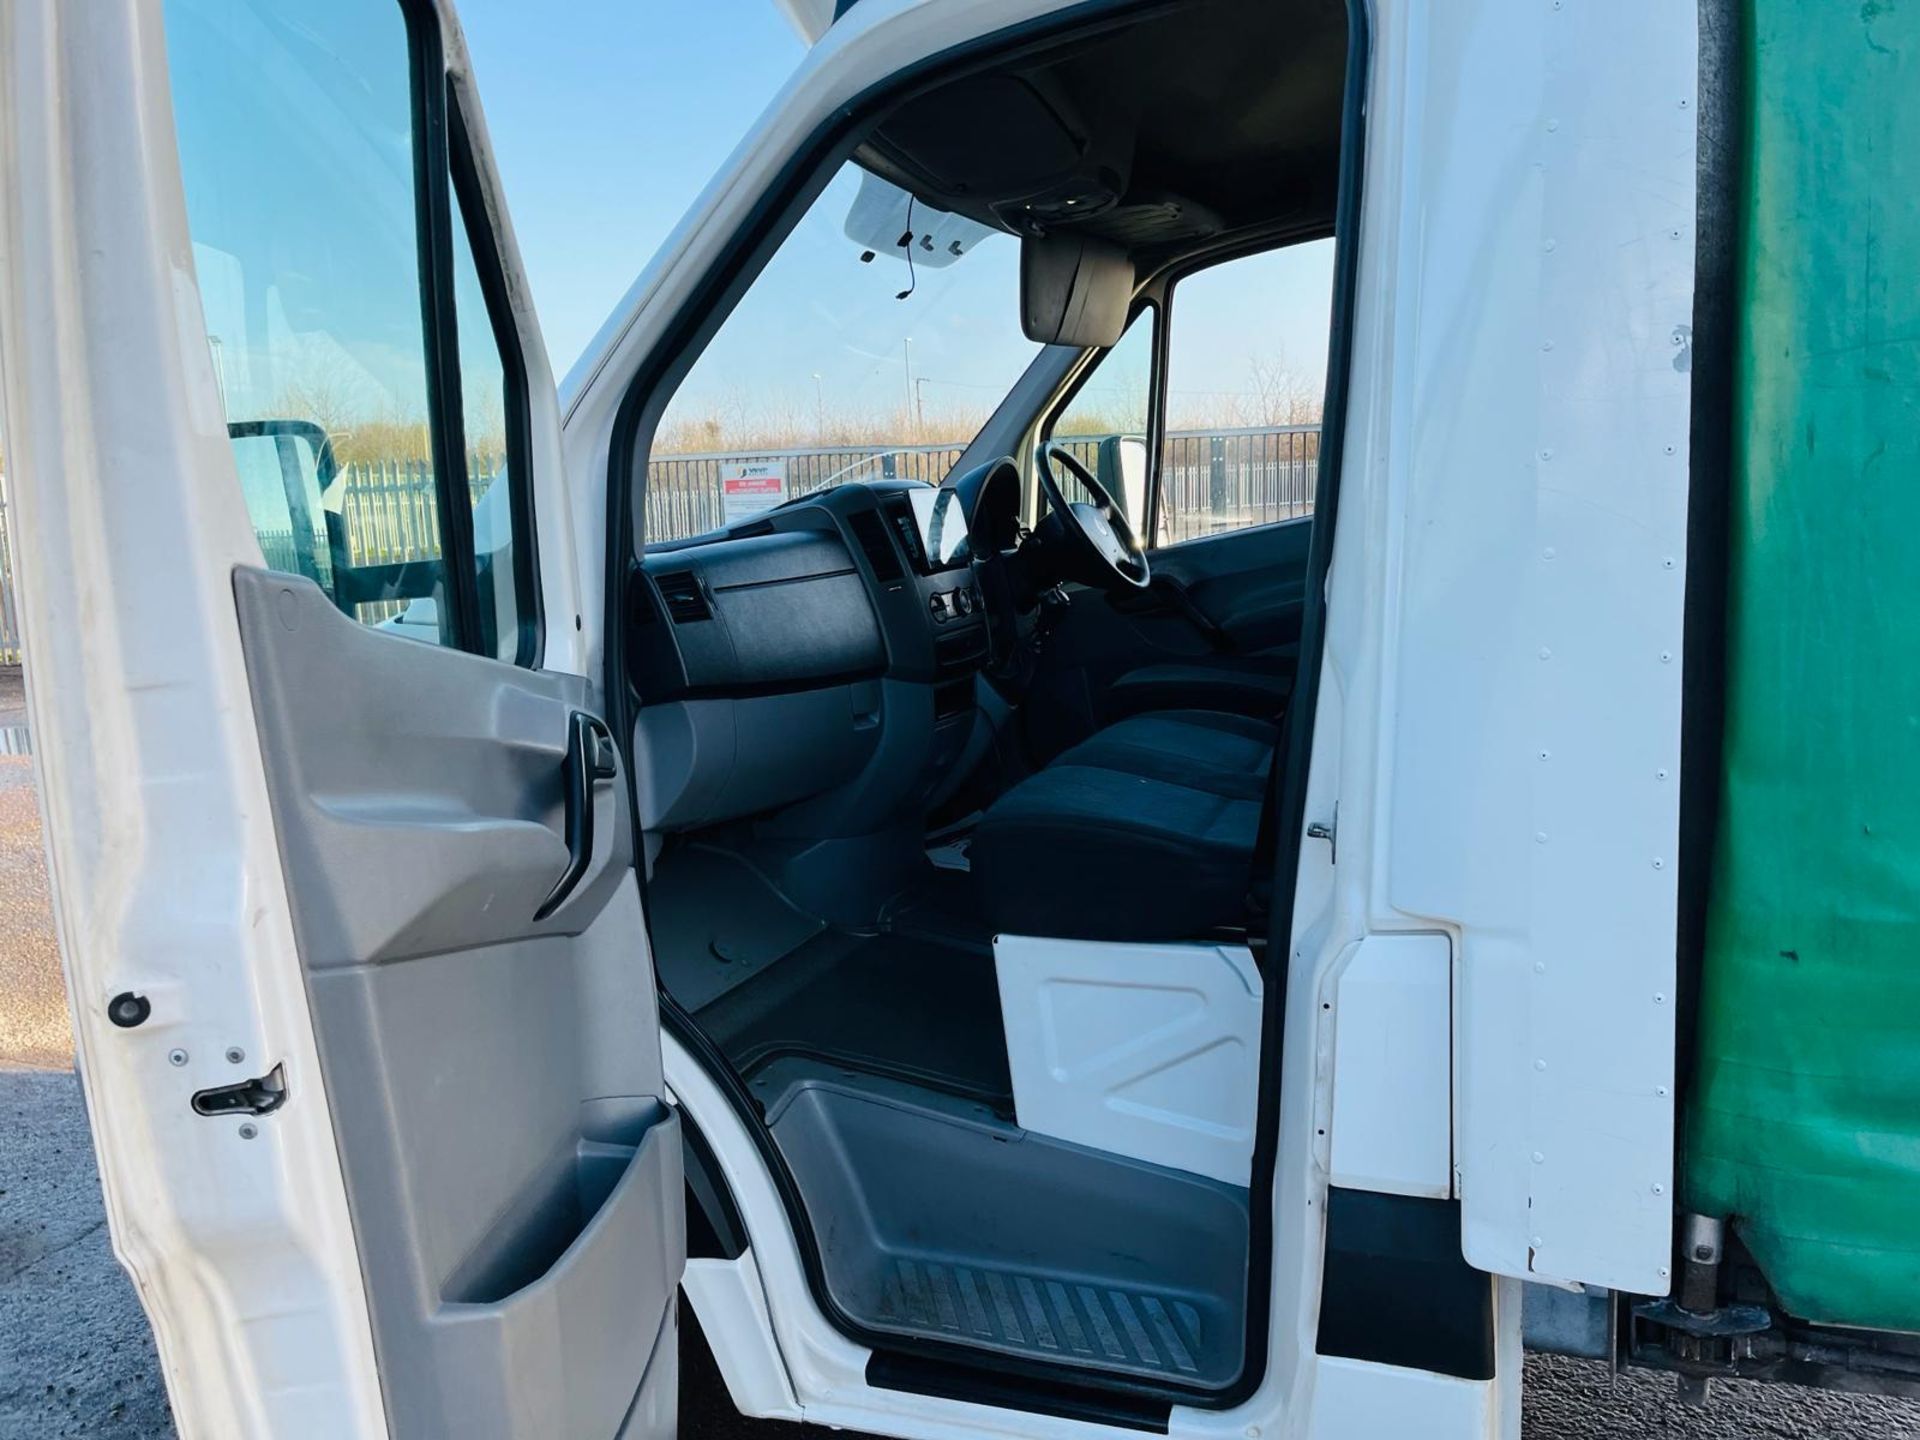 ** ON SALE ** Volkswagen Crafter Curtain Side 2.0L TDI 109 L3 H1 - 2011 '61 Reg'- Air Conditioning - Image 19 of 24